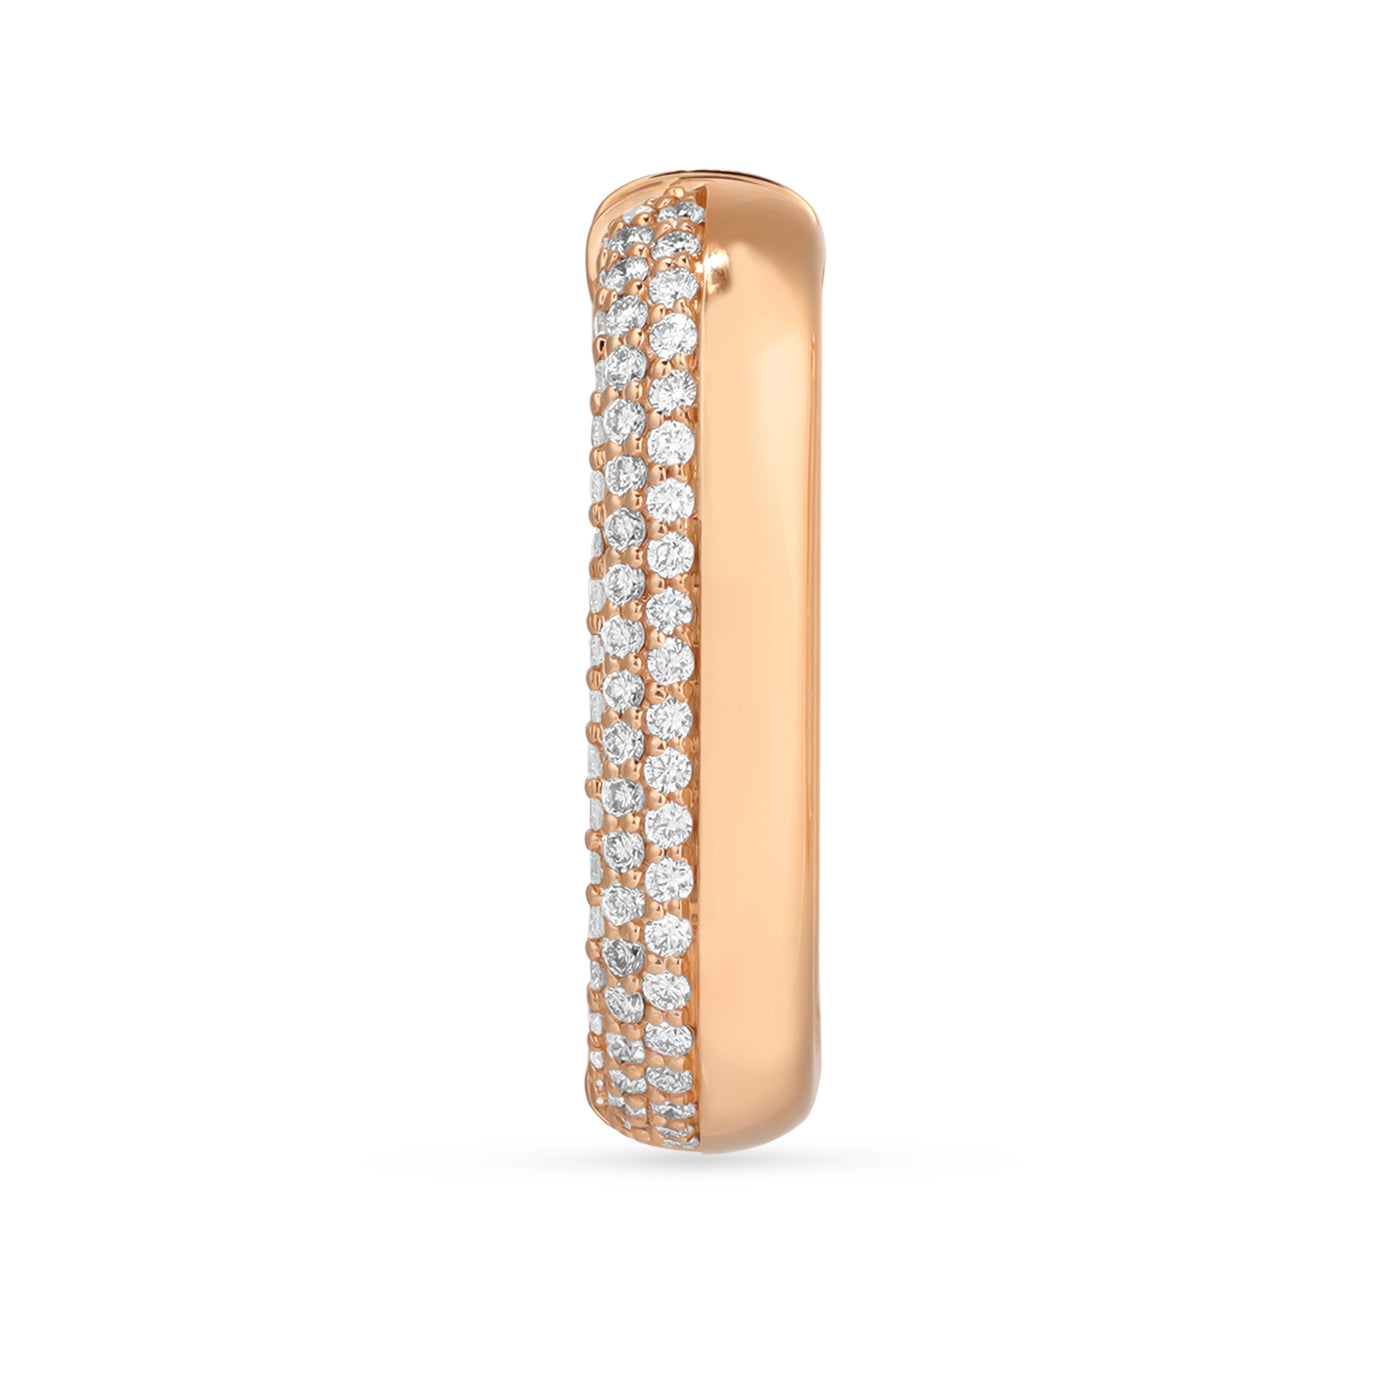 ETOILE plaine Rose gold with pave diamond earring